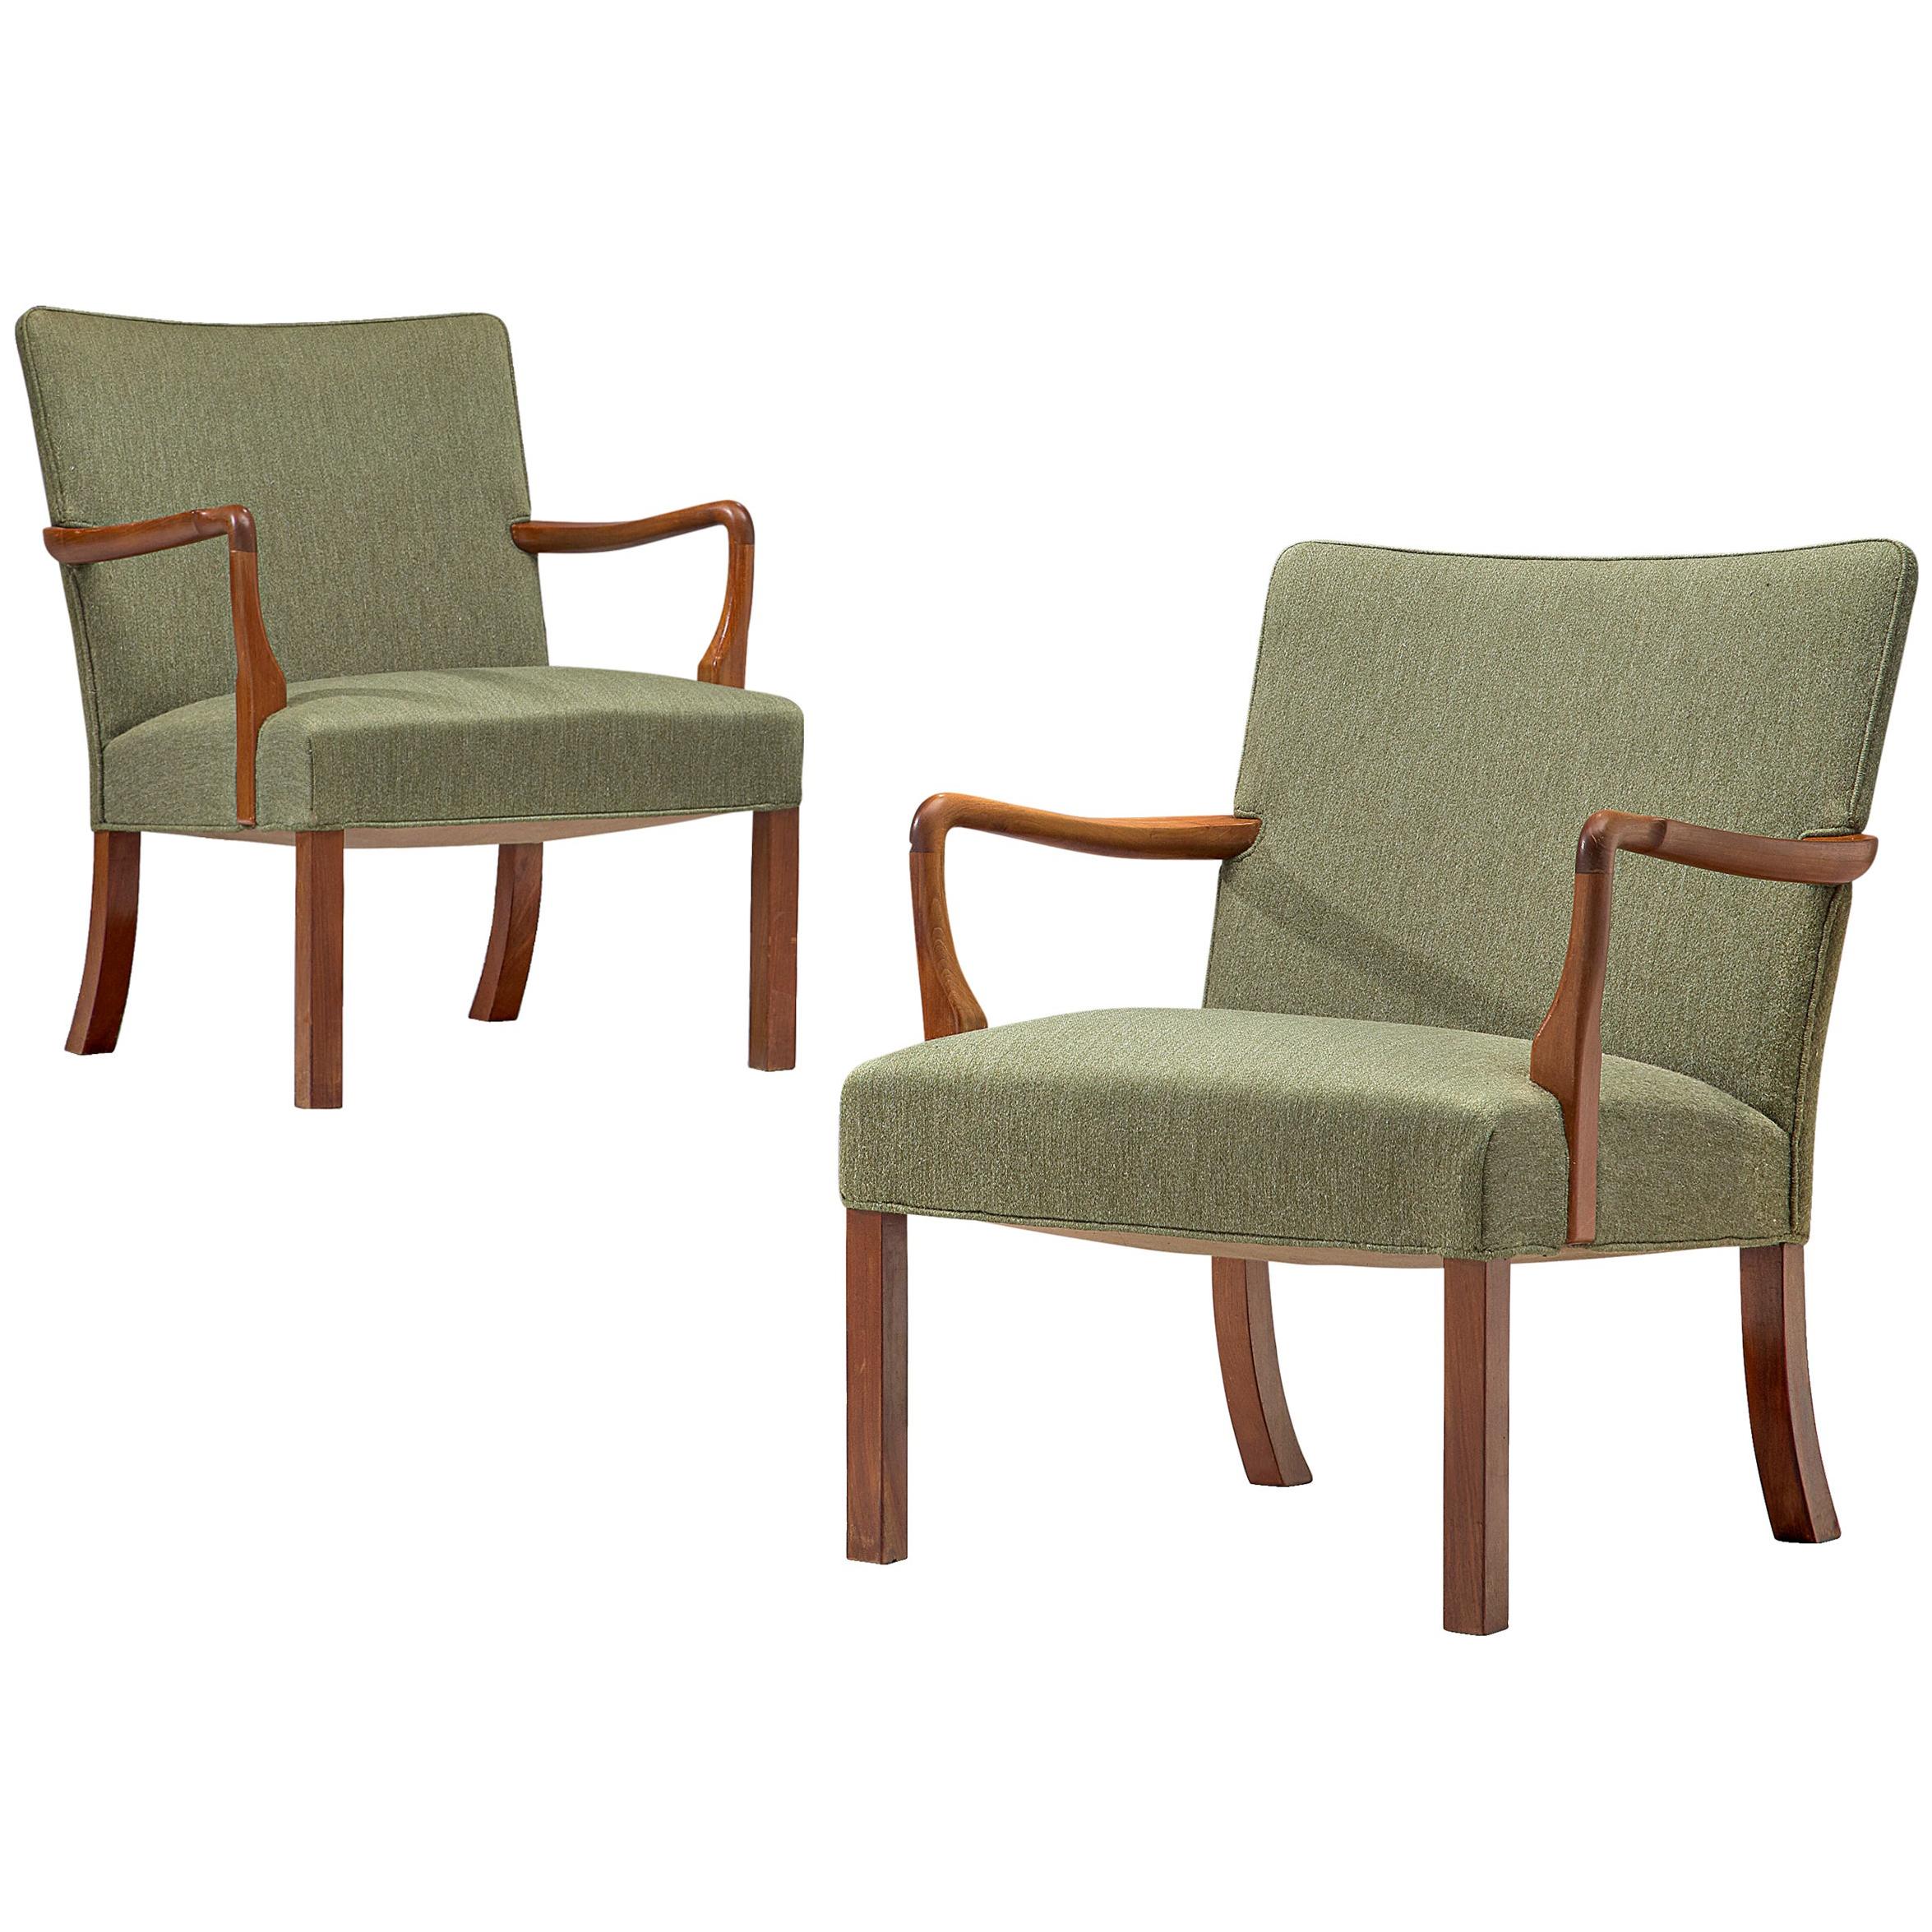 Jacob Kjær Pair of Lounge Chairs in Mahogany and Green Bouclë Upholstery